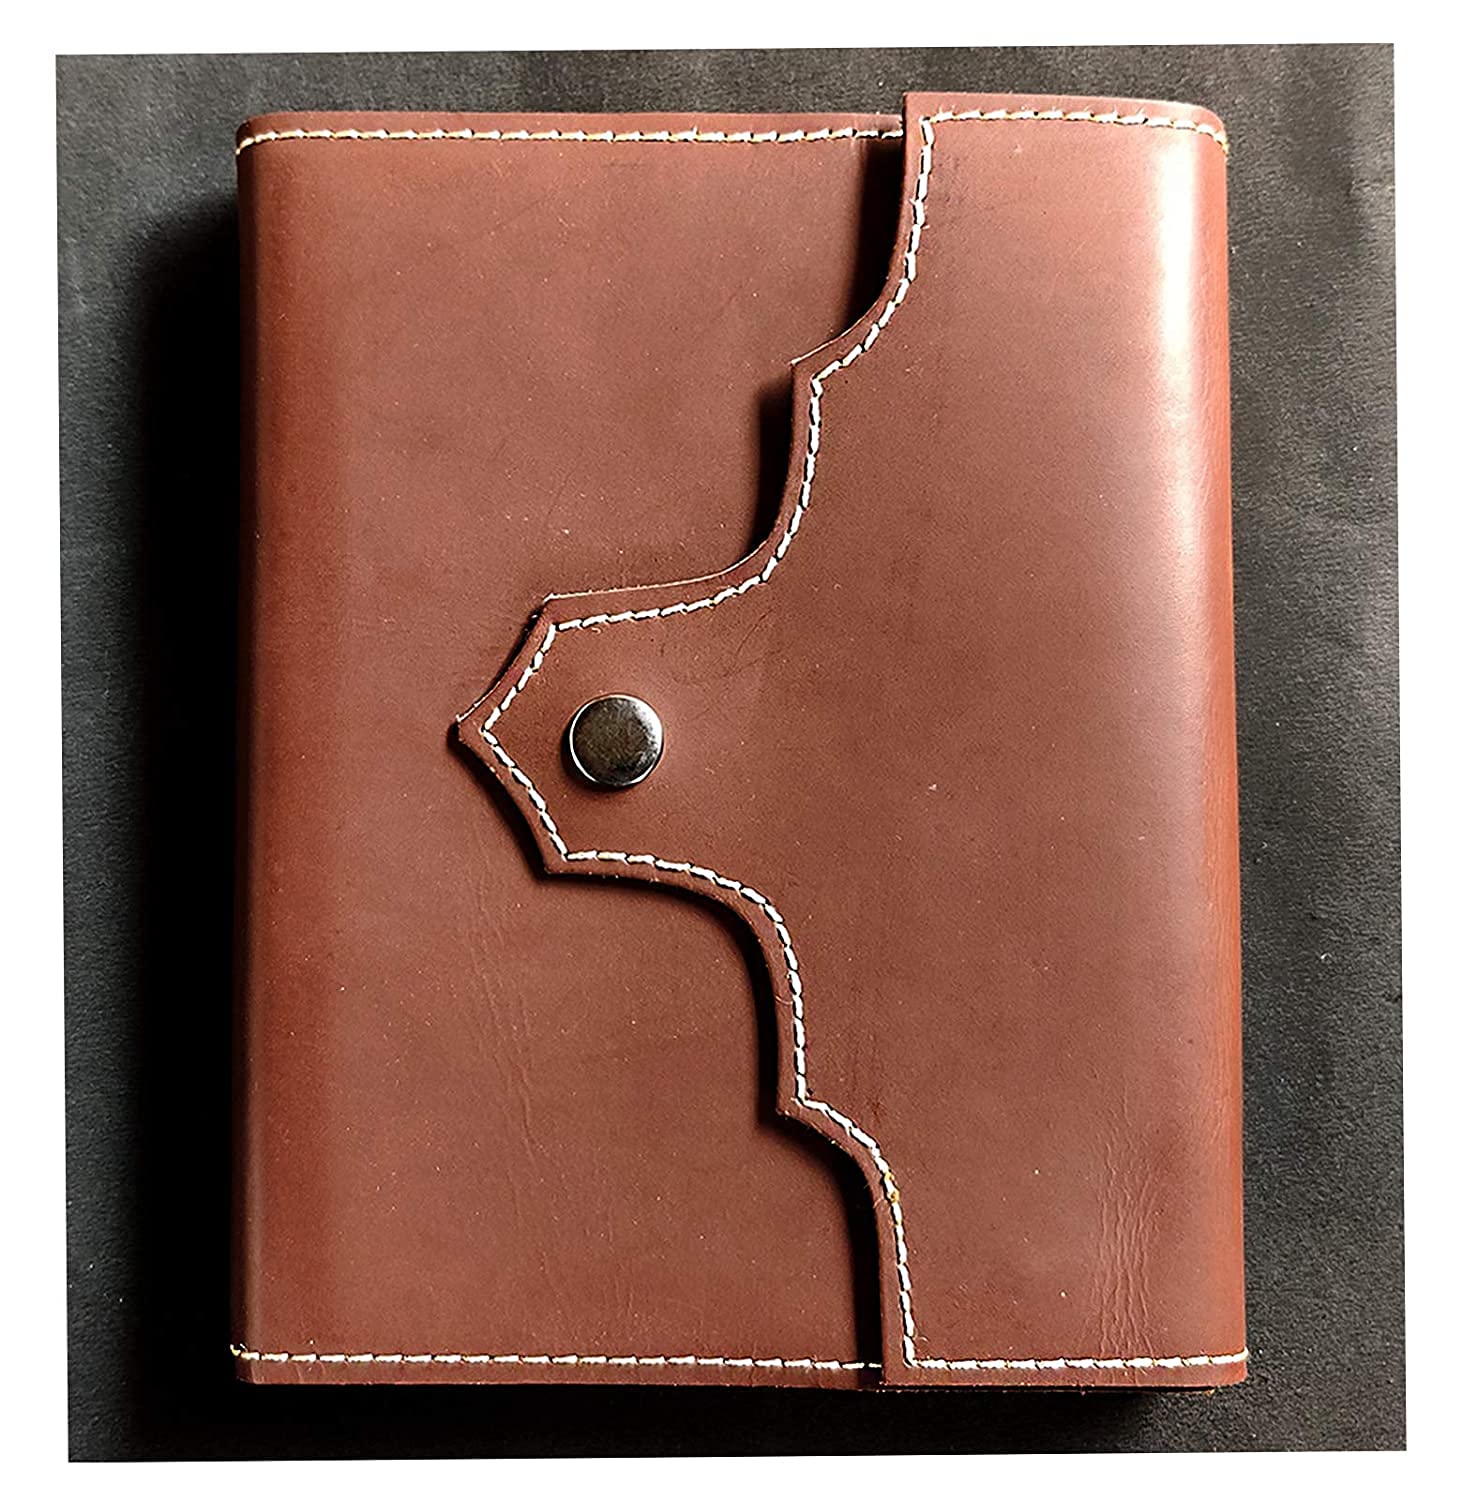 Refillable Leather Bound Journal for Writing Vintage Notebook - Leather Journal for Men Women